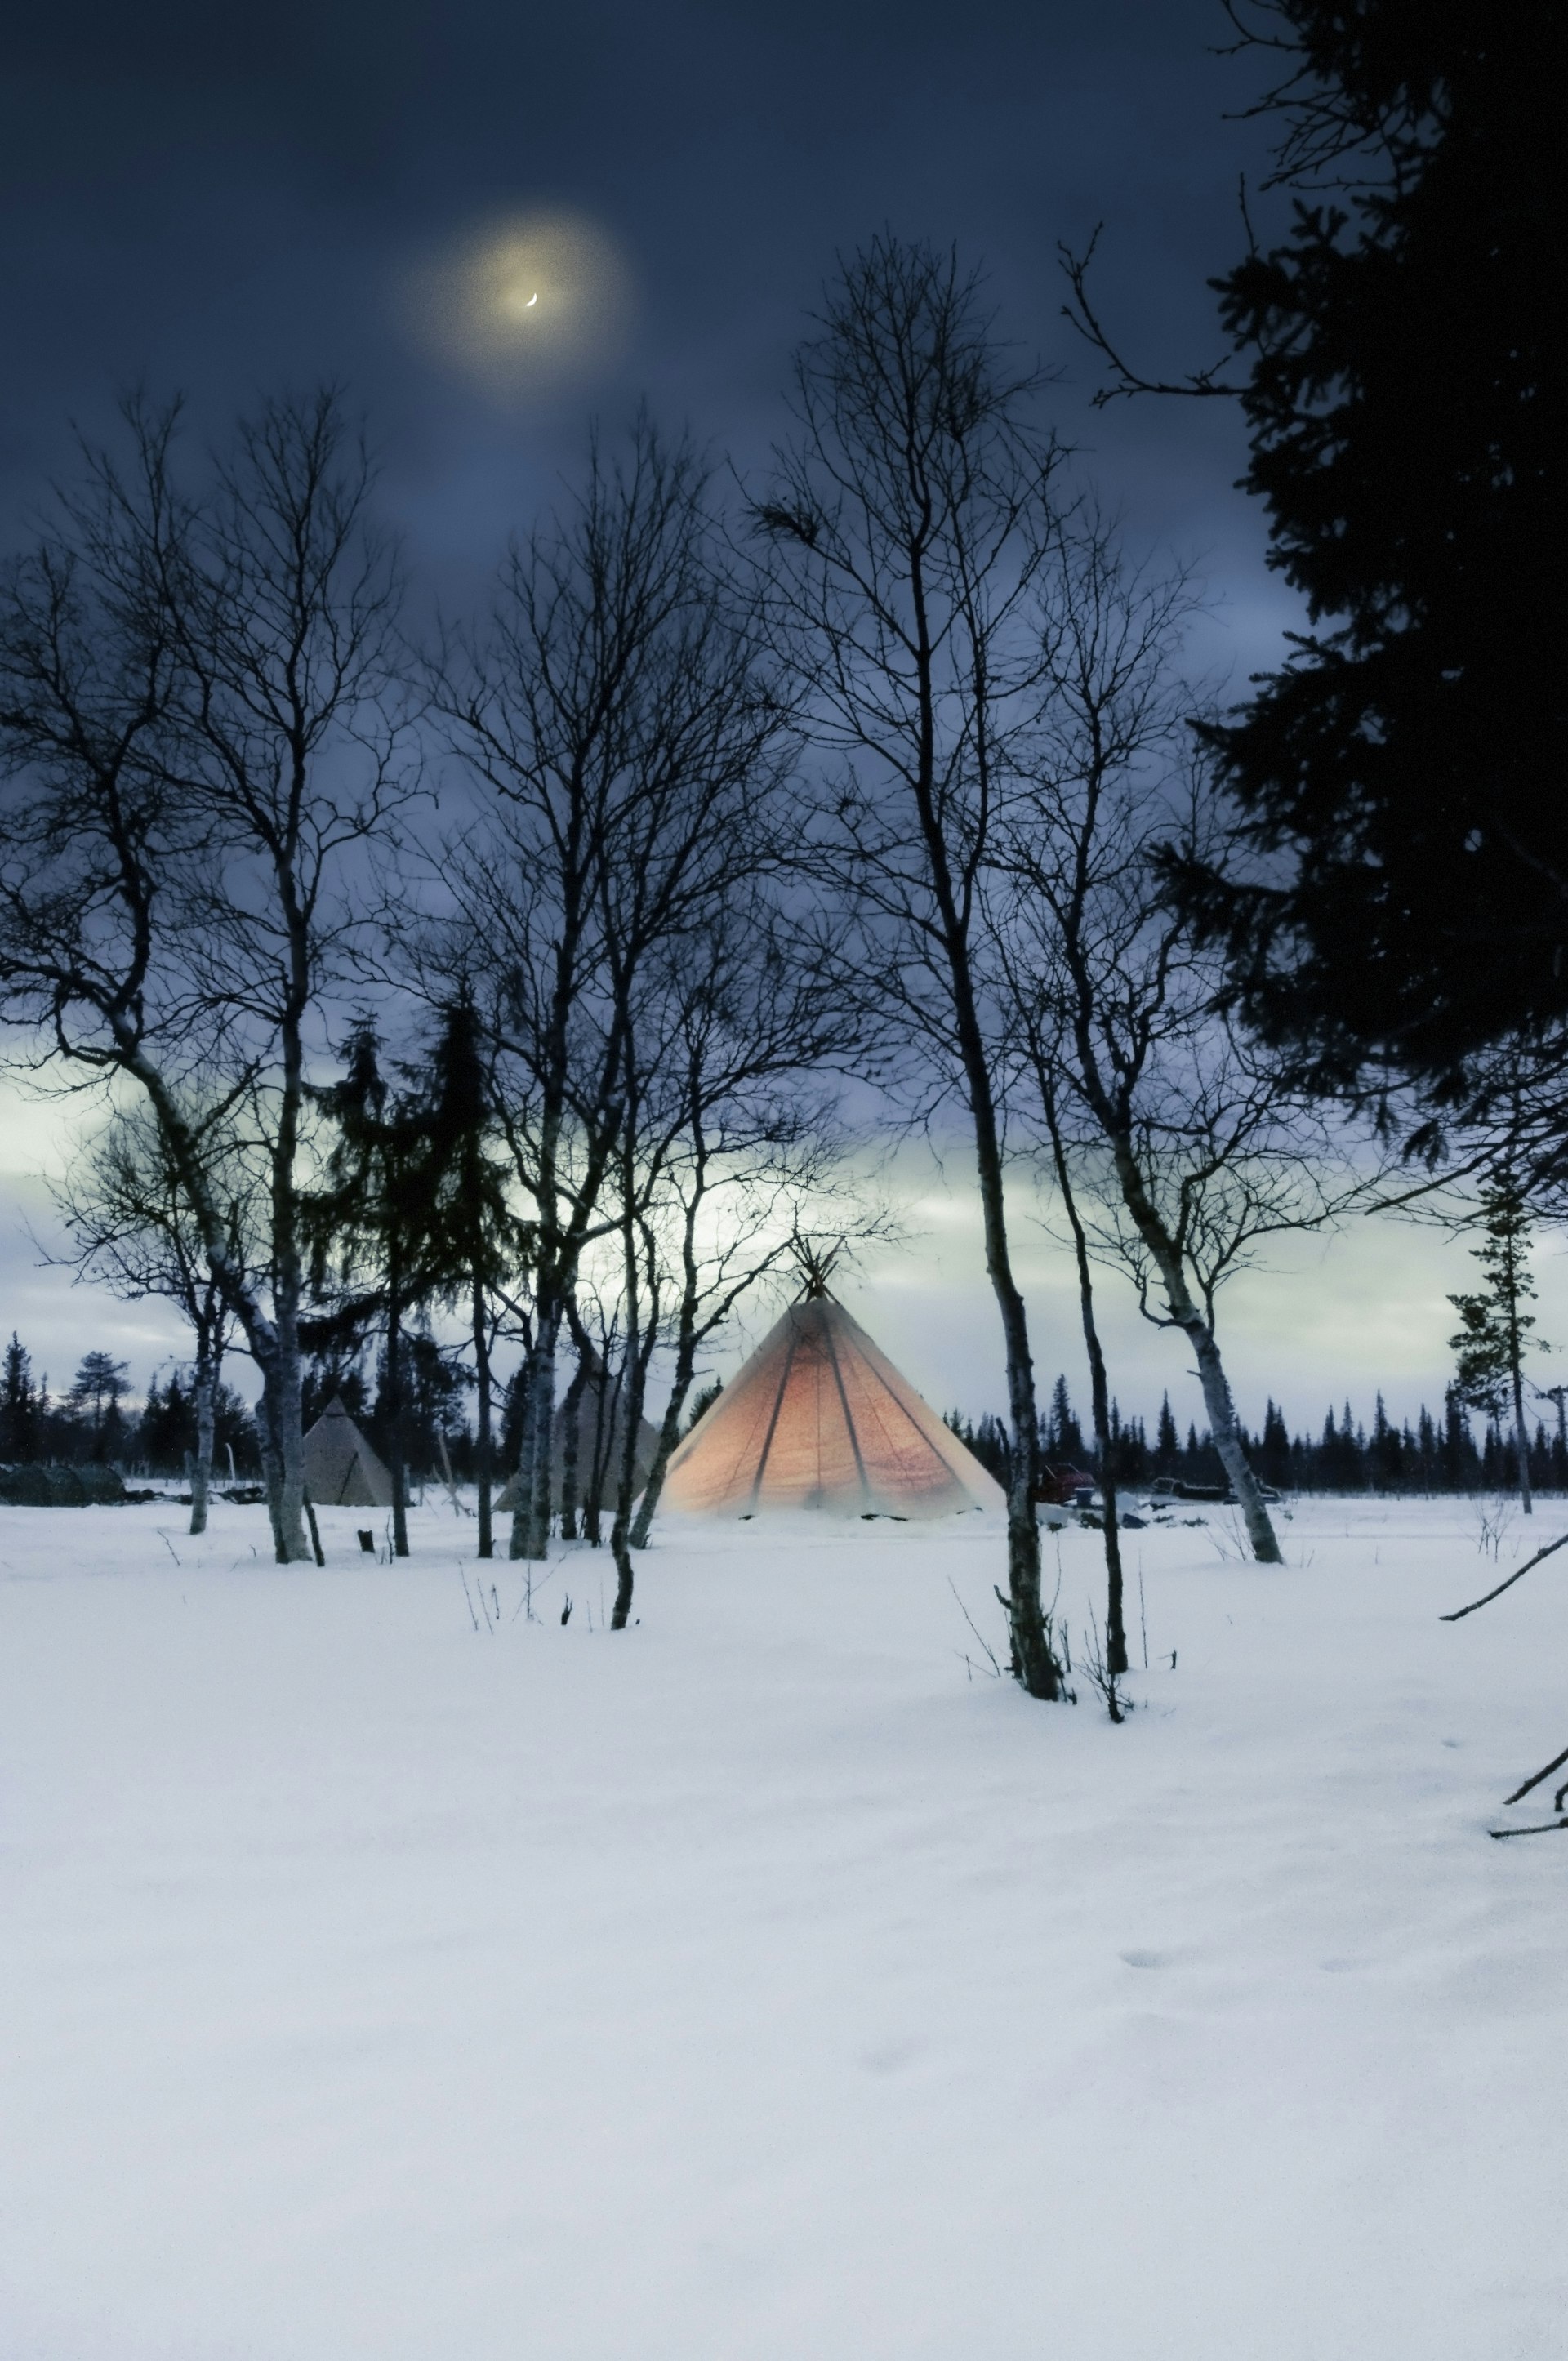 A traditional Sami tent glows with light from inside. It is in the middle of a snow-covered forest.